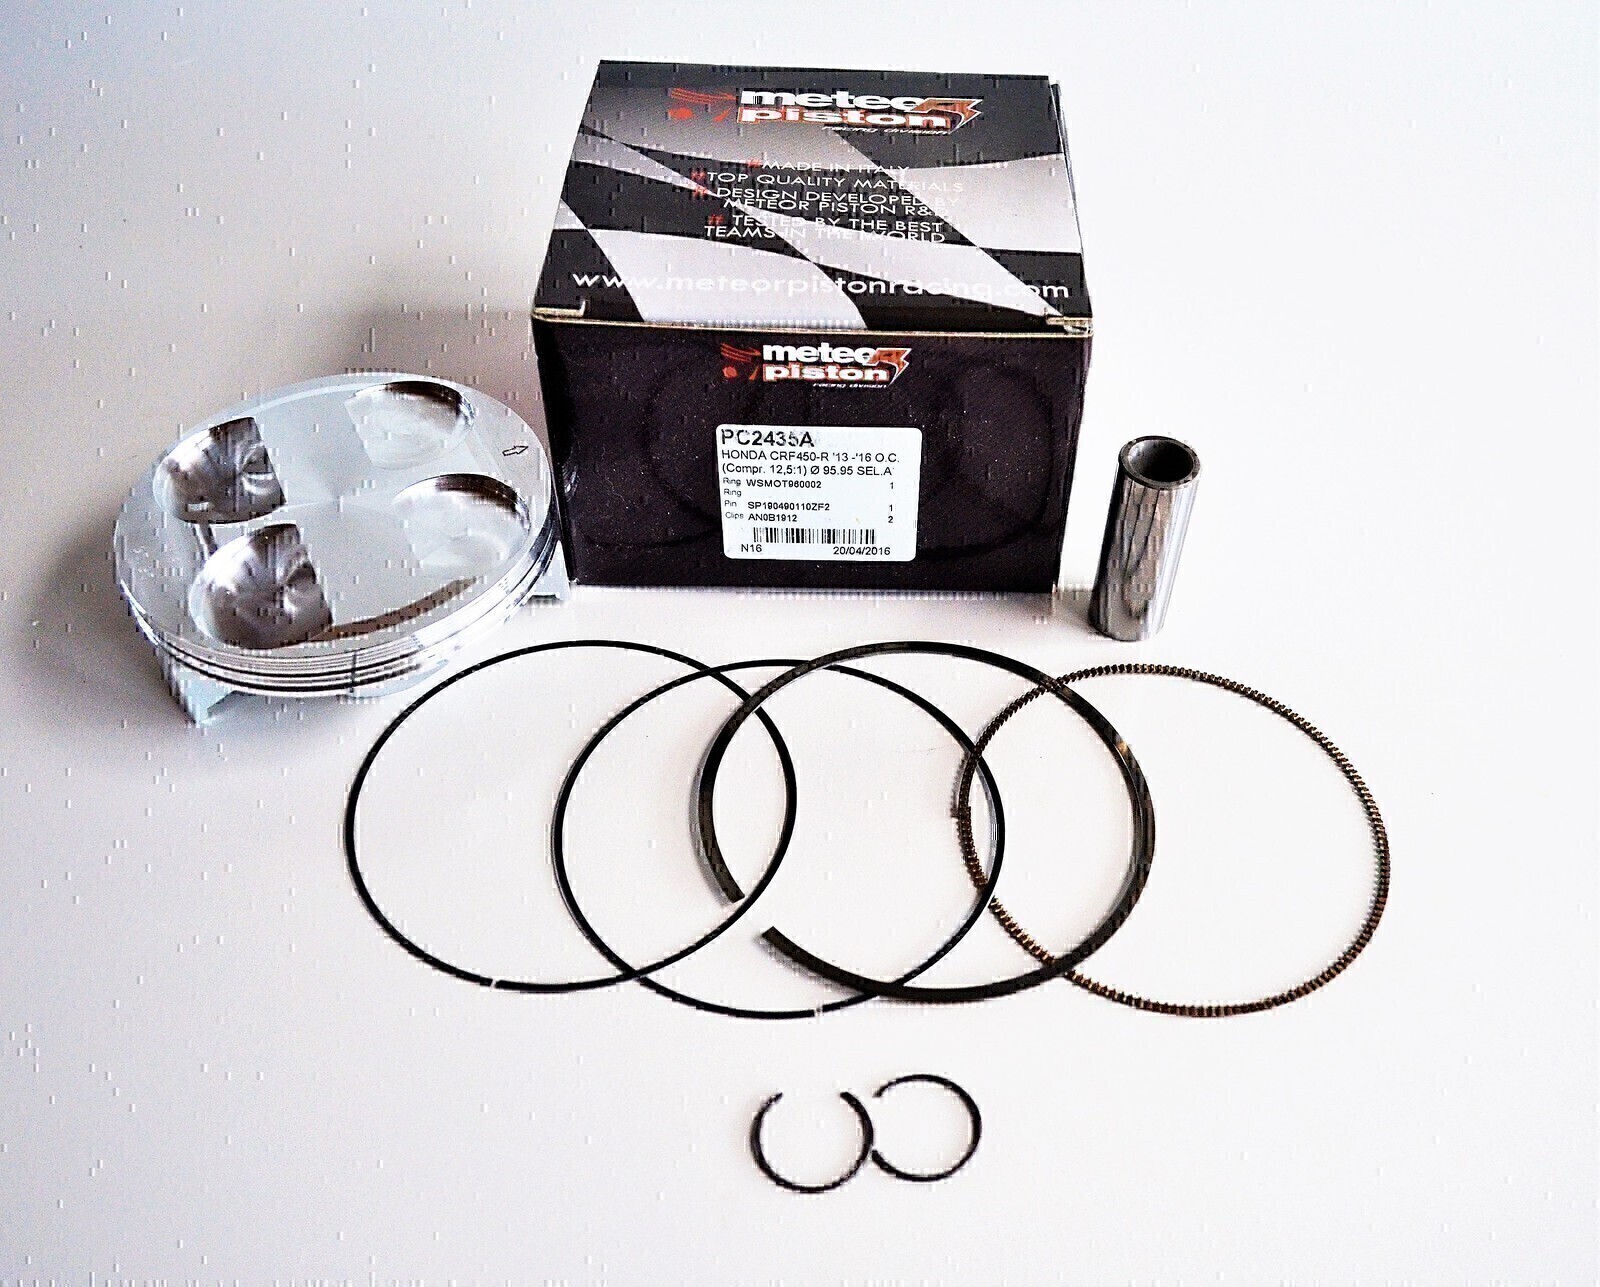 METEOR PISTON KIT FOR HONDA 4T CRF450R 2013 - 2016 ORIG COMP 12.5:1 95.95 SIZE A